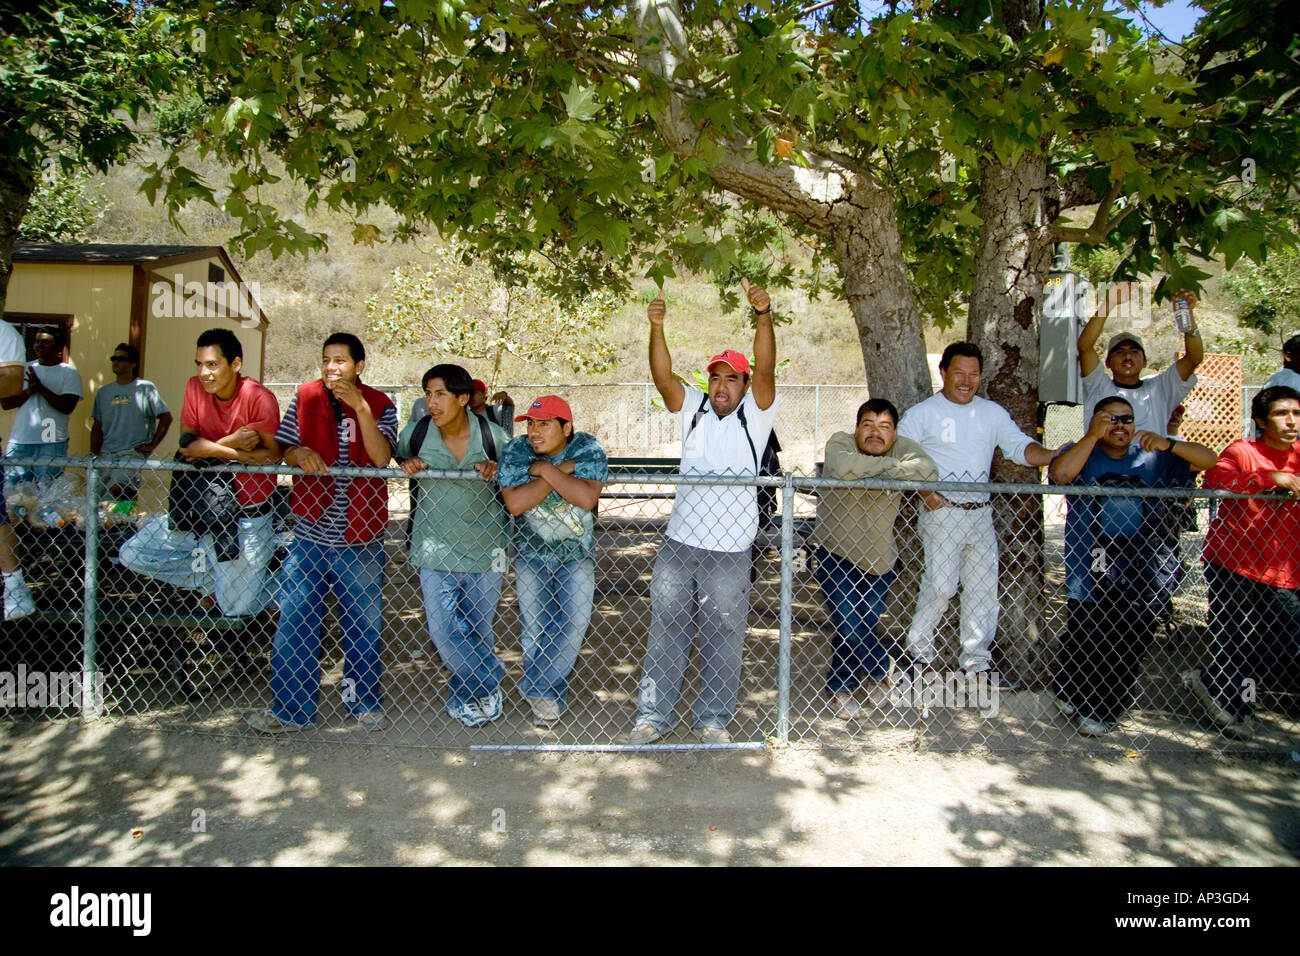 Hispanic day laborers show support for a rally in their favor at a day laborer hiring center in Laguna Beach, CA. Stock Photo